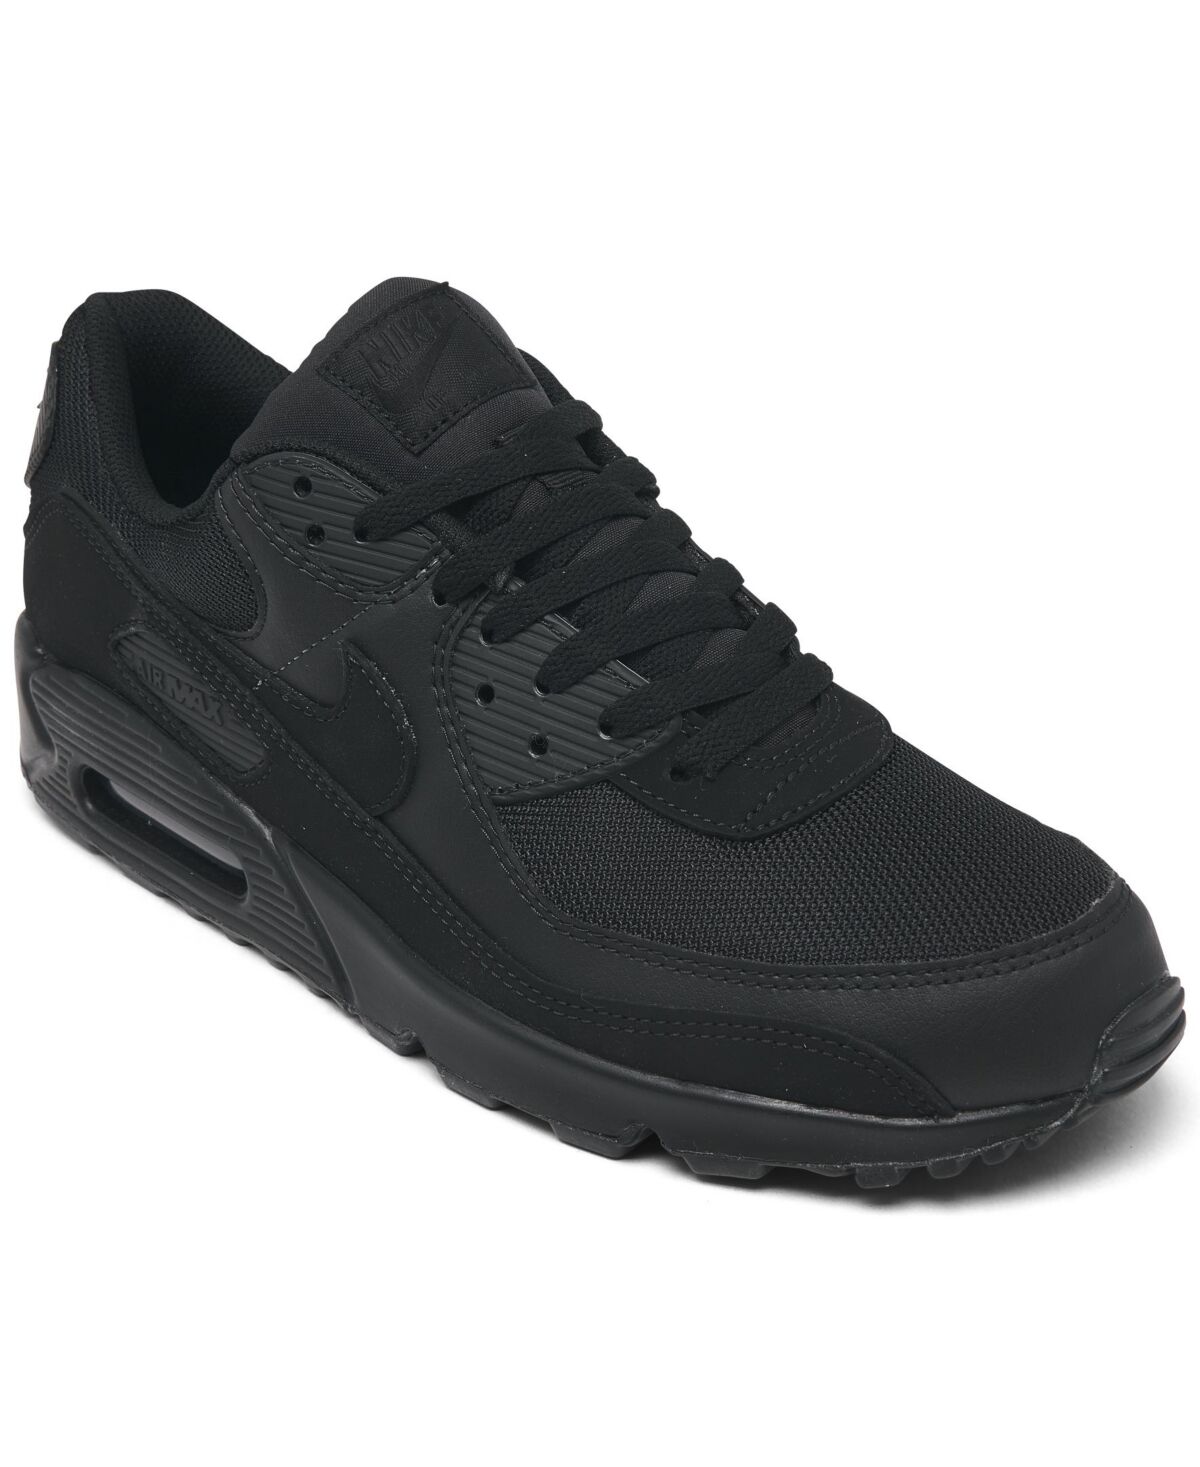 Nike Men's Air Max 90 Casual Sneakers from Finish Line - Black